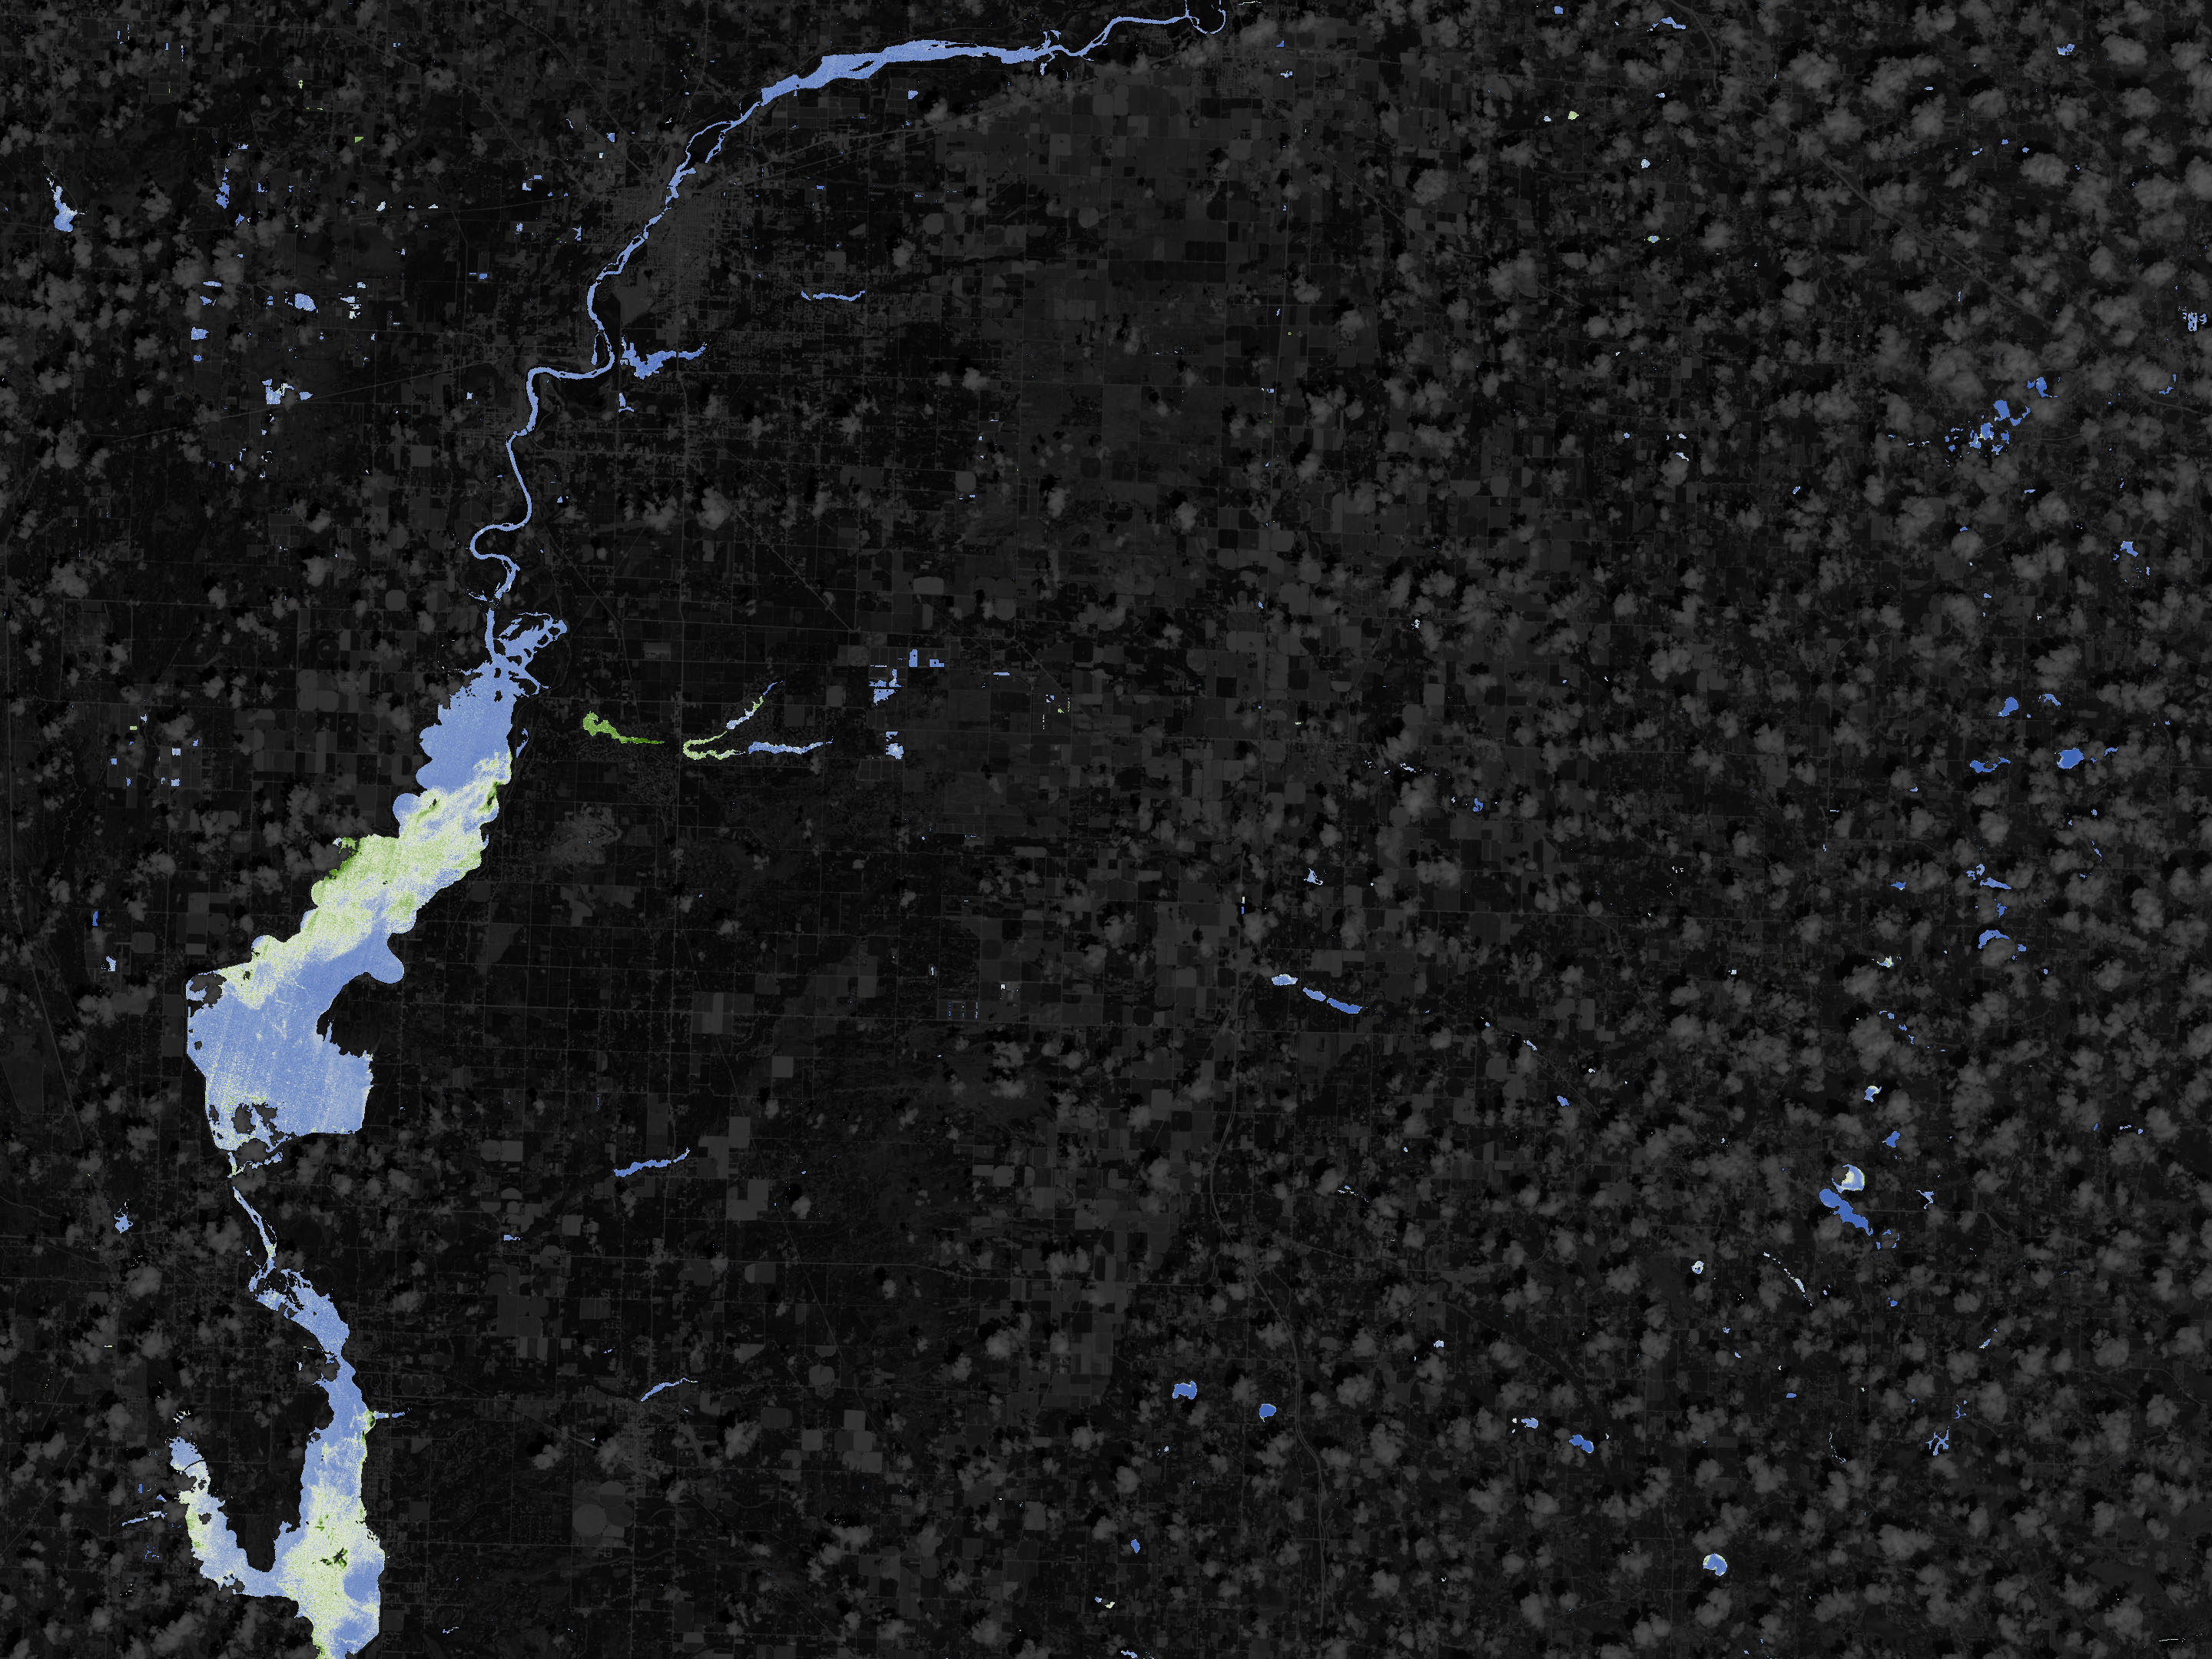 NASA Helps Warn of Harmful Algae in Lakes, Reservoirs - related image preview